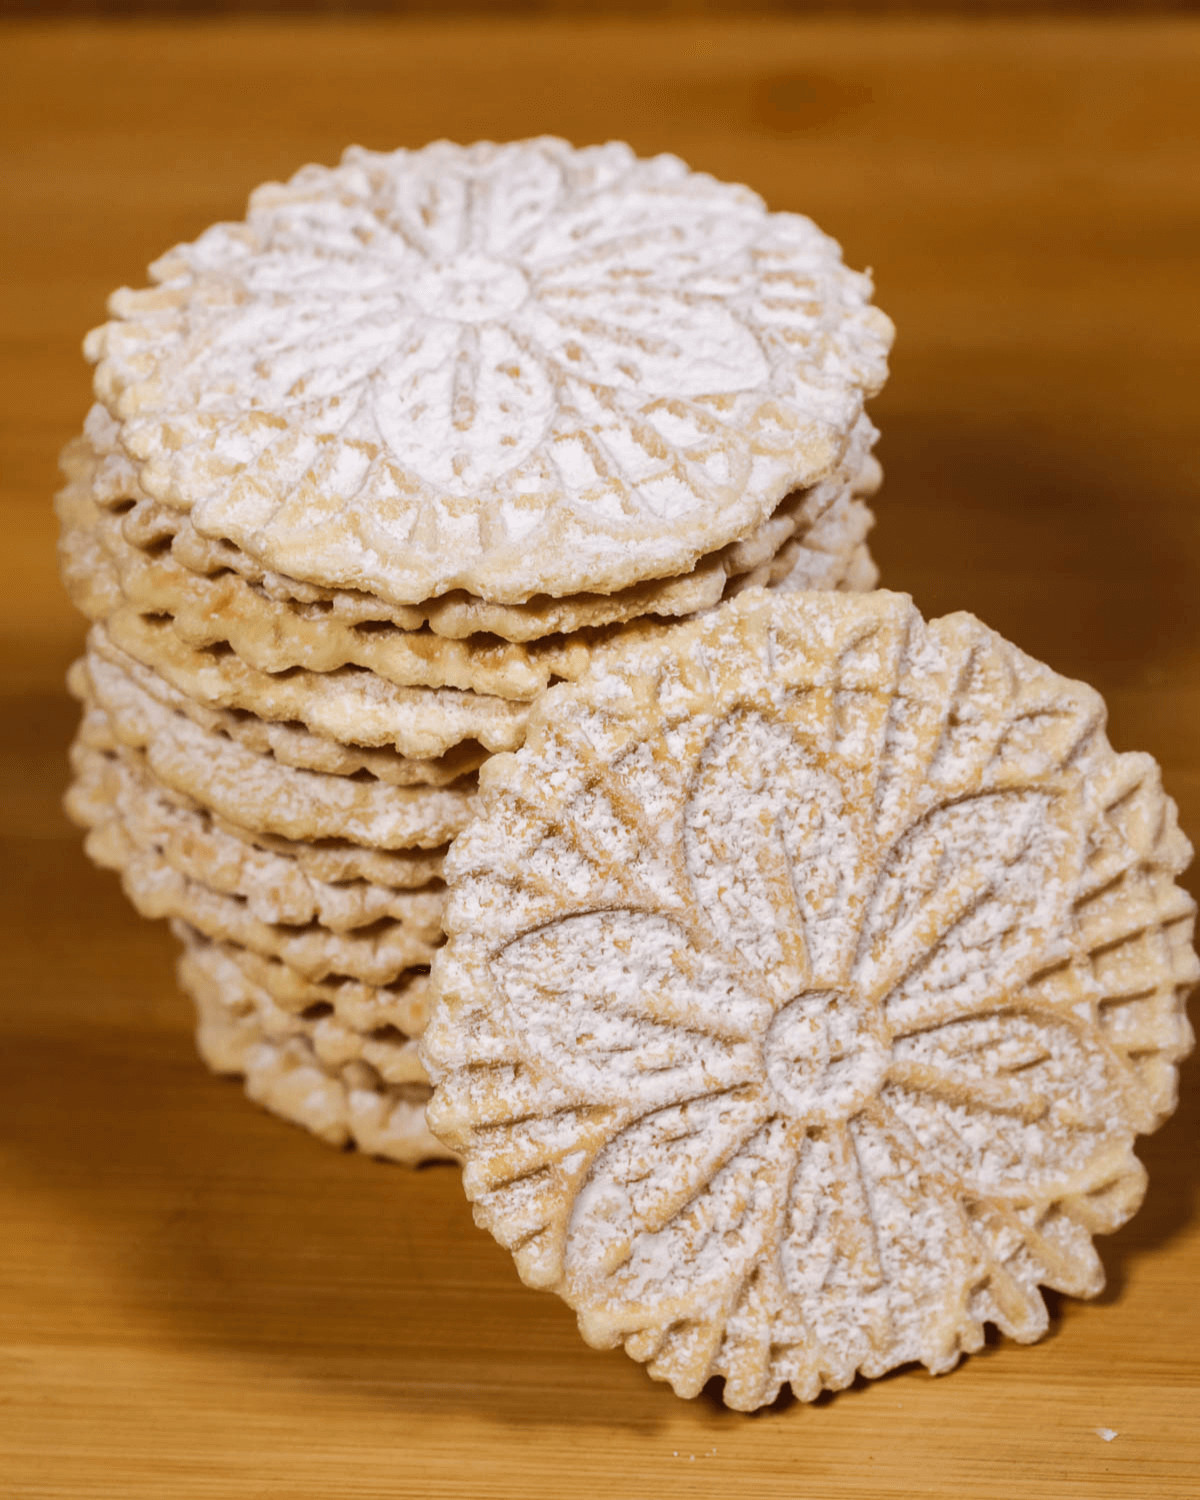 A stack of the pizzelle coojies.